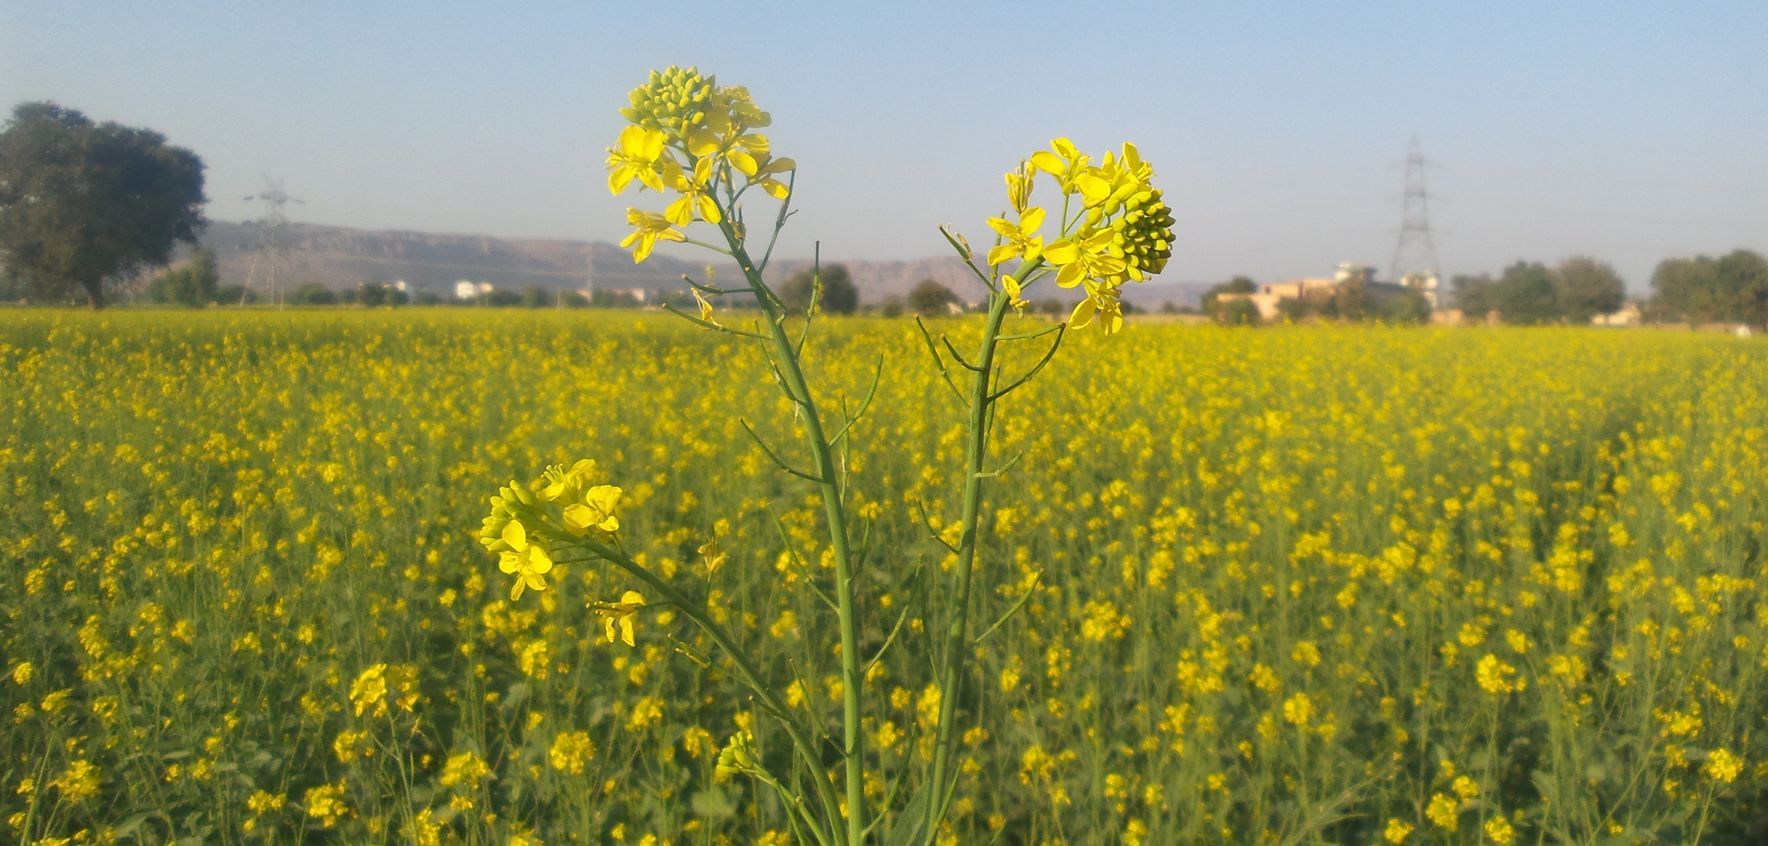 farmers grow less quantity of wheat and mustard